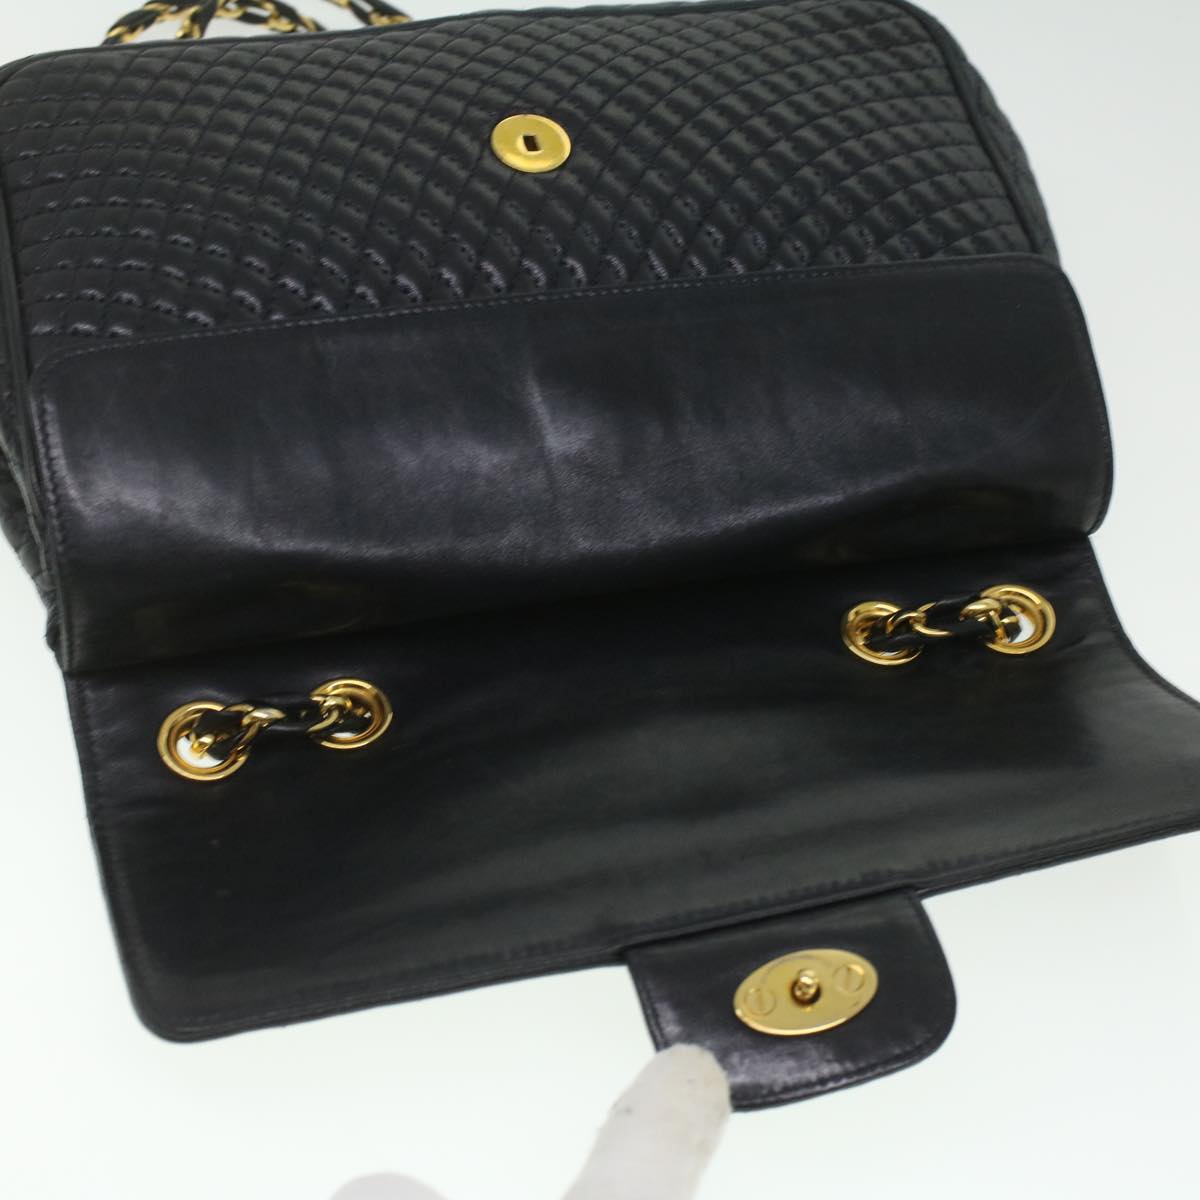 BALLY Chain Shoulder Bag Leather Black Auth am3867